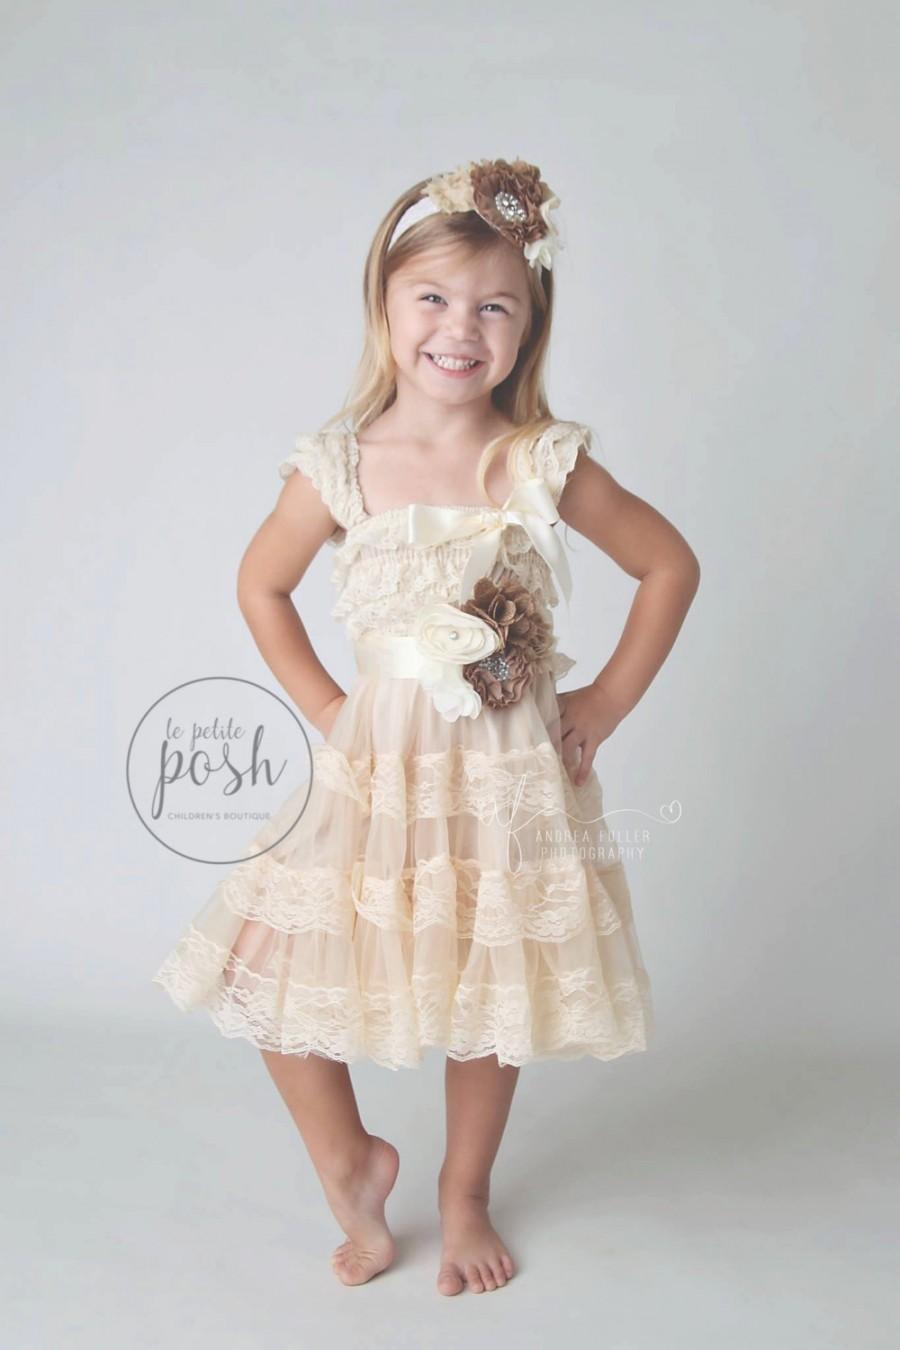 Wedding - rustic chic flower girl dress, country flower girl dress, flower girl dresses, champagne flower girl dress, burlap, lace flower girl dress